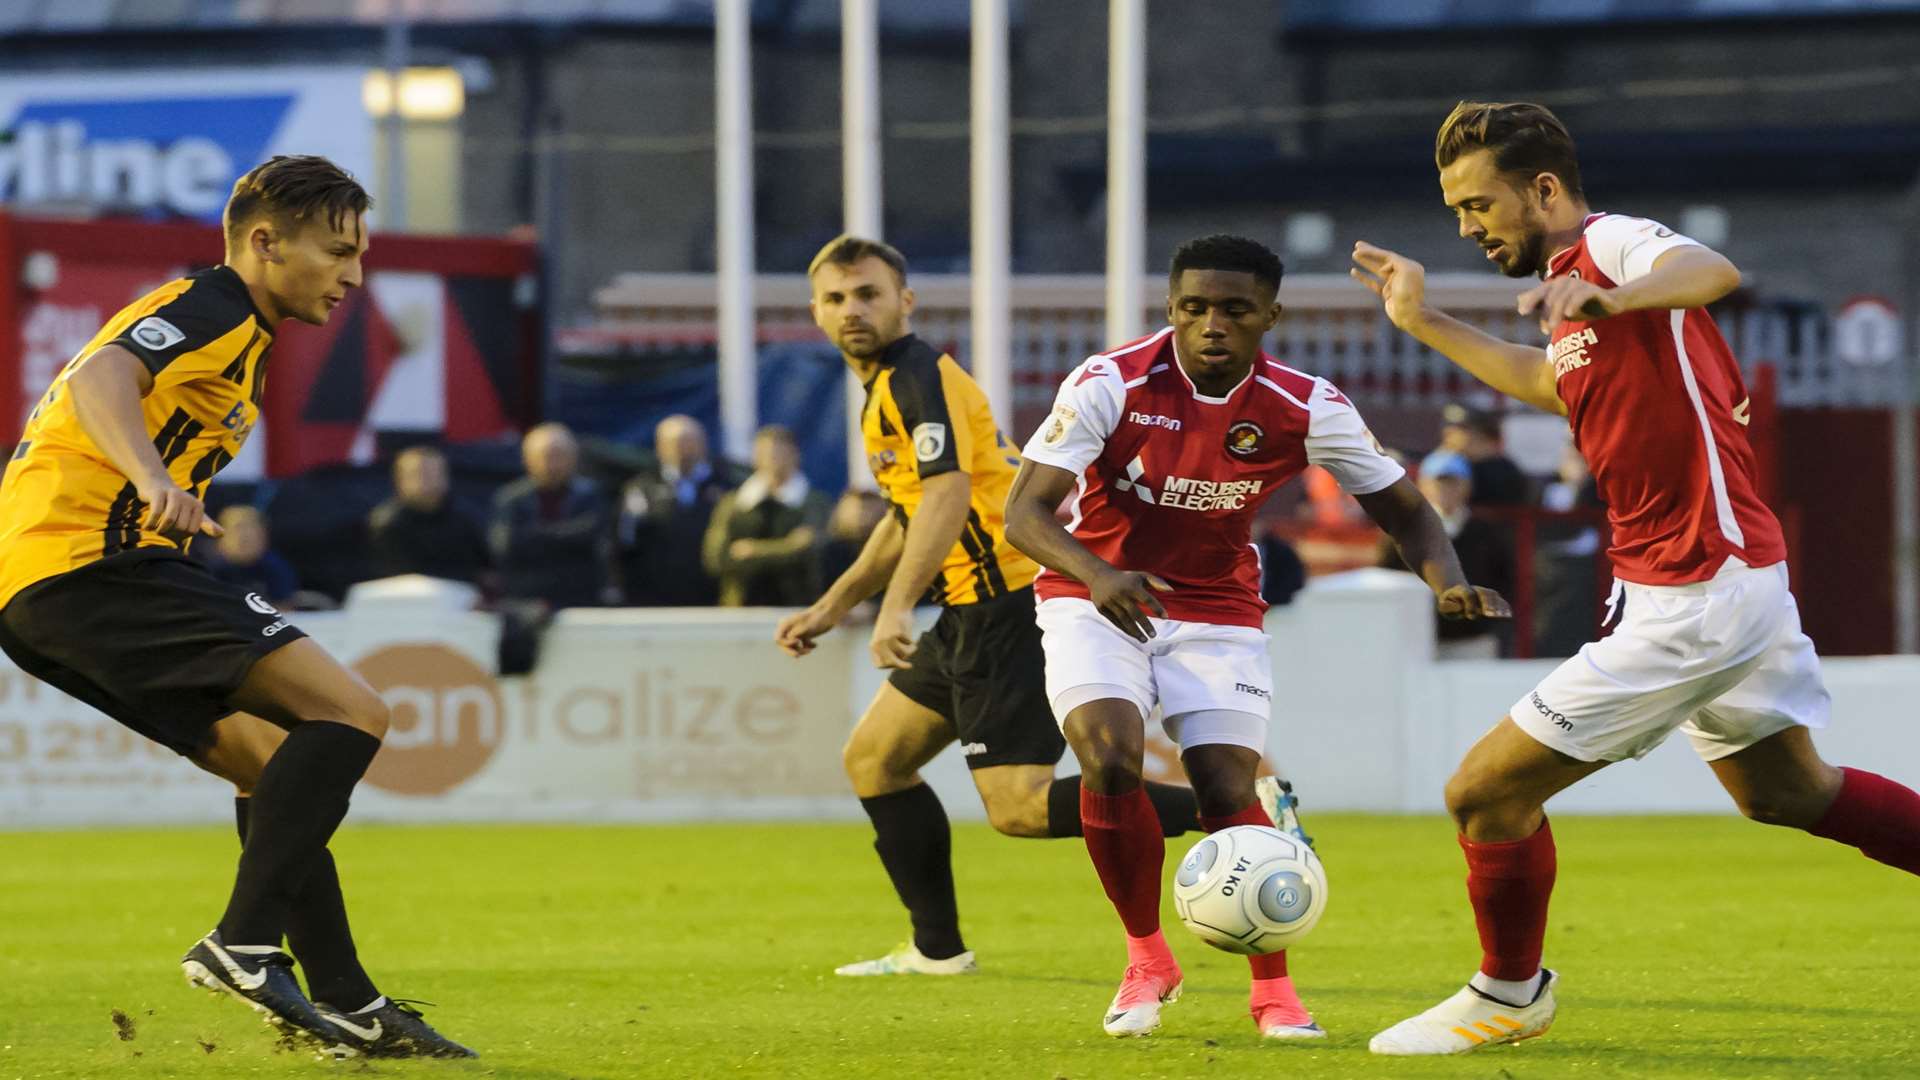 Jack Powell on the ball for Ebbsfleet against Maidstone Picture: Andy Payton